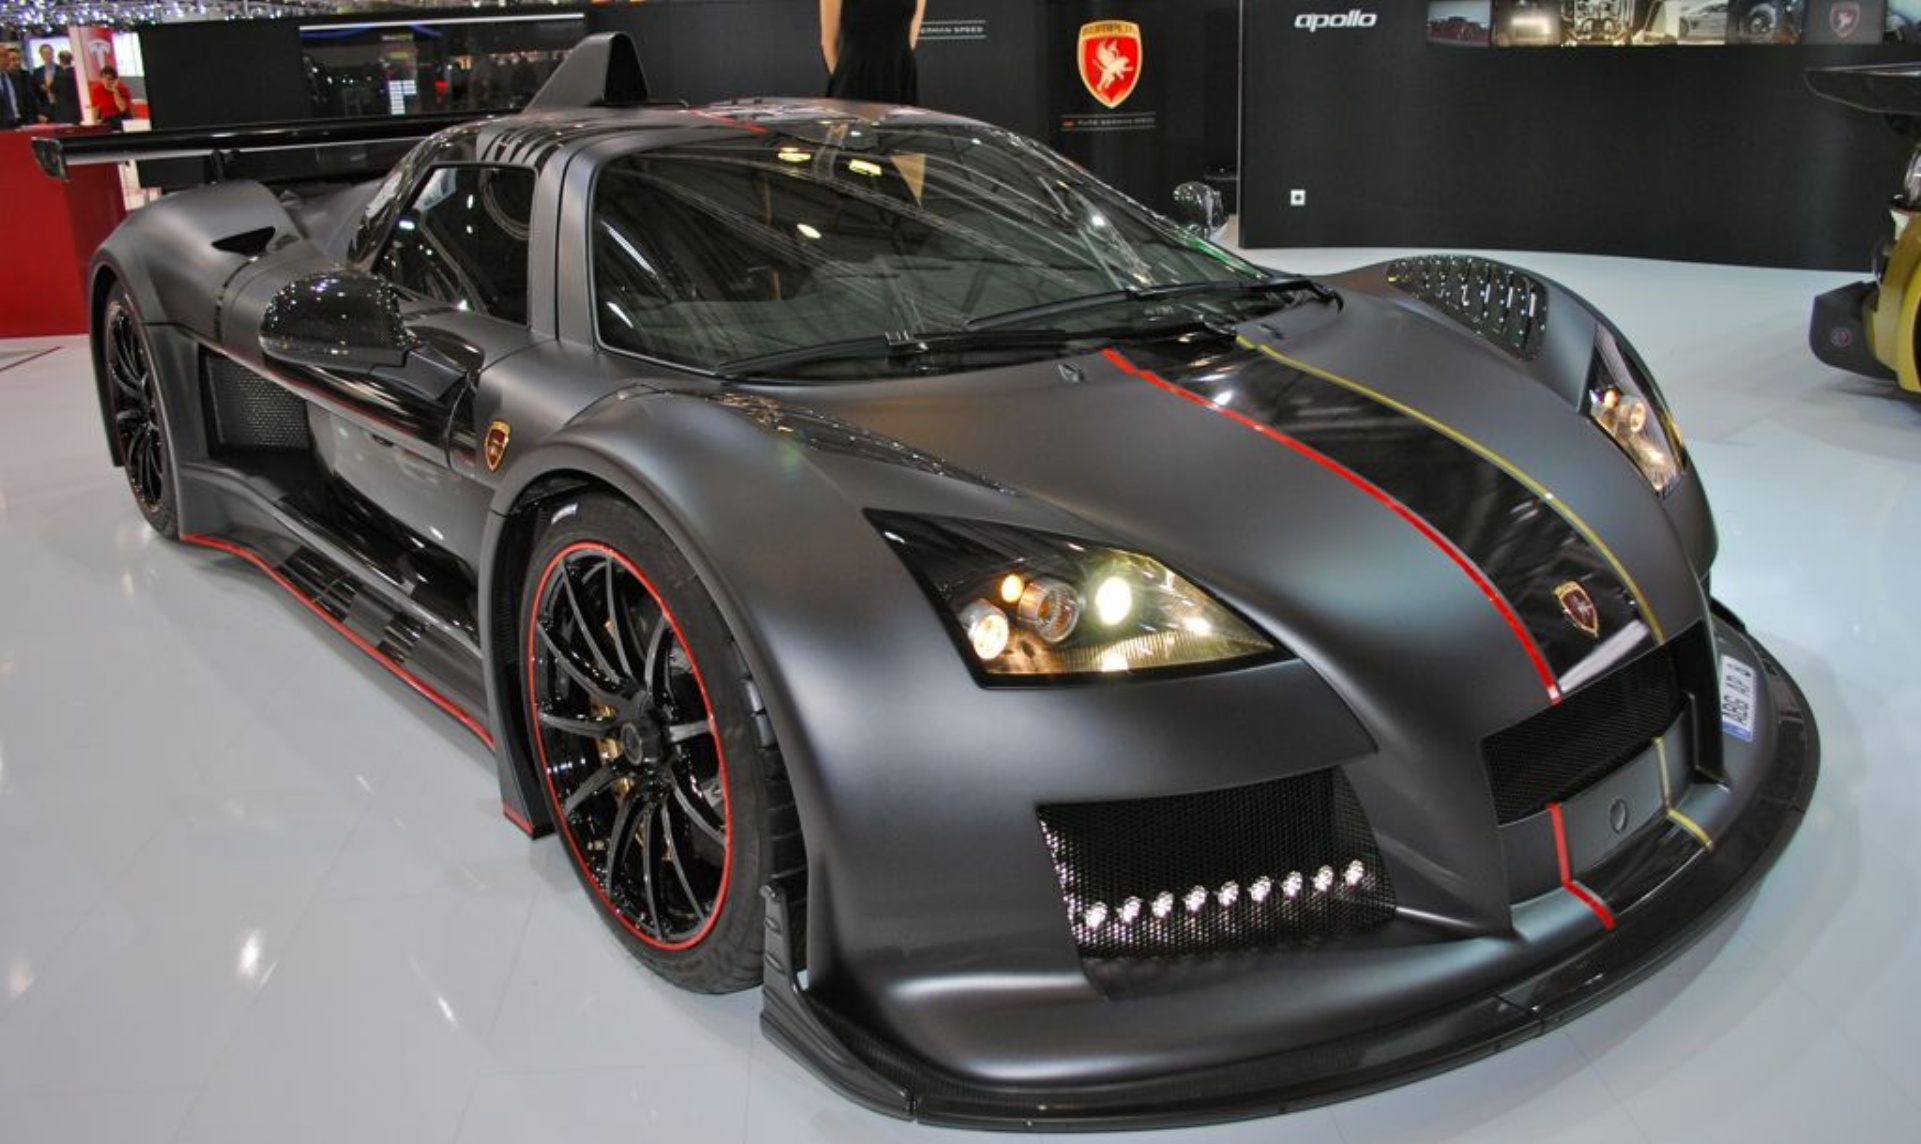 Our list of exotic cars includes the Gumpert Apollo